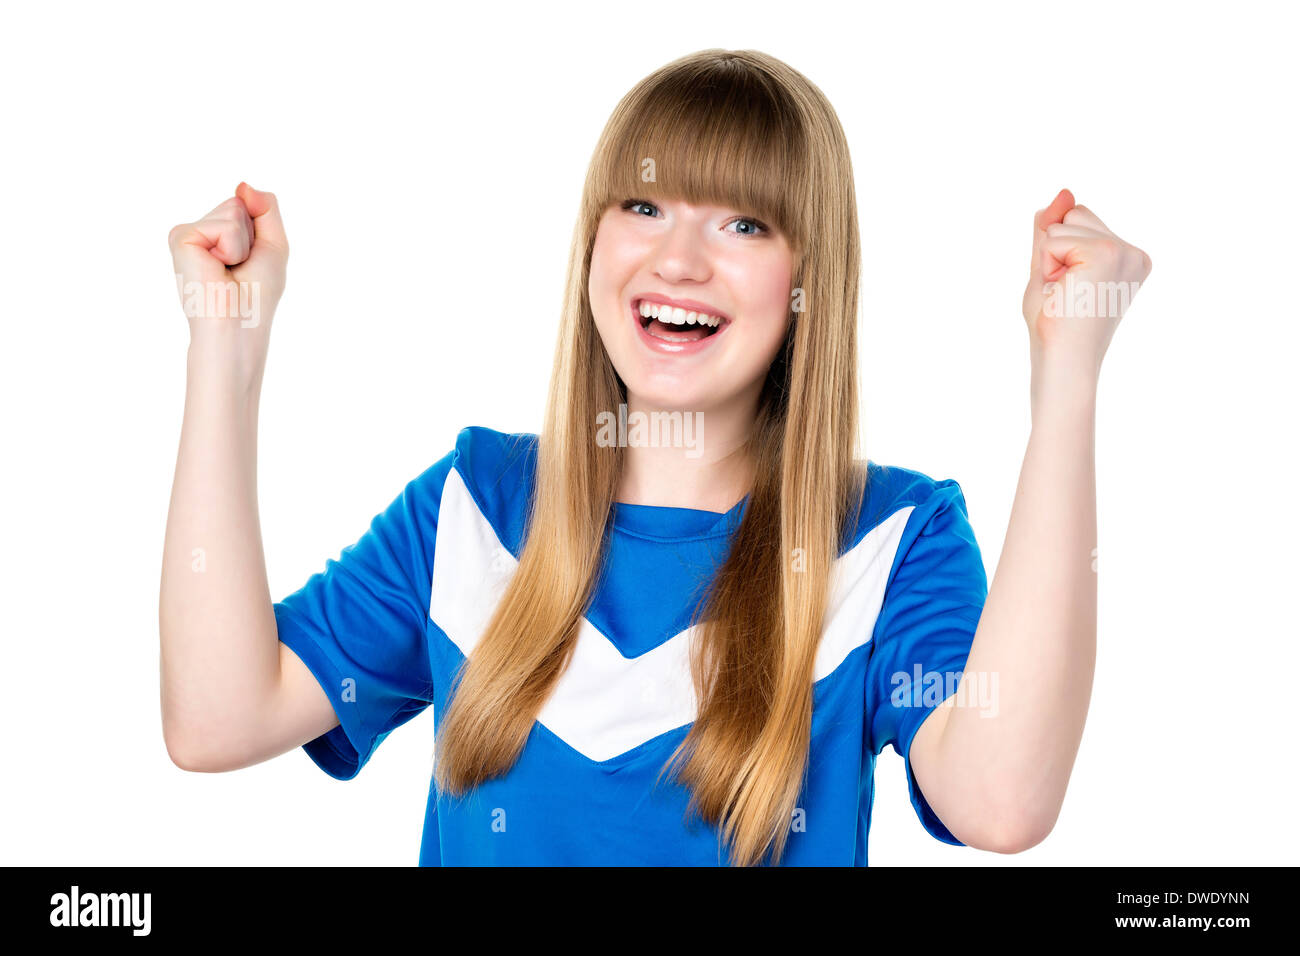 Happy girl in blue soccer shirt is holding her fists up Stock Photo